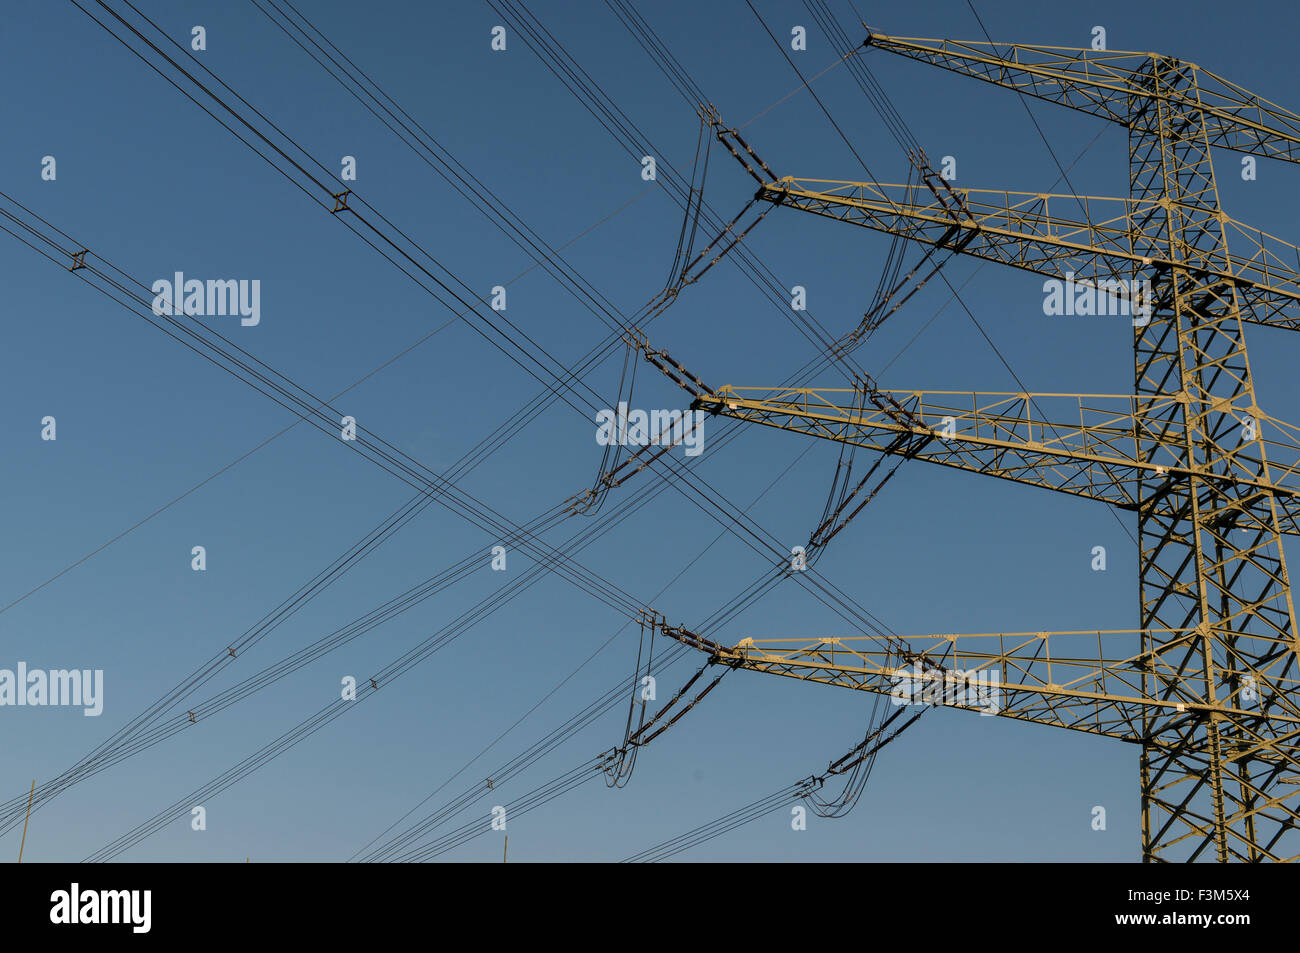 Overhead powerline in front of blue sky Stock Photo